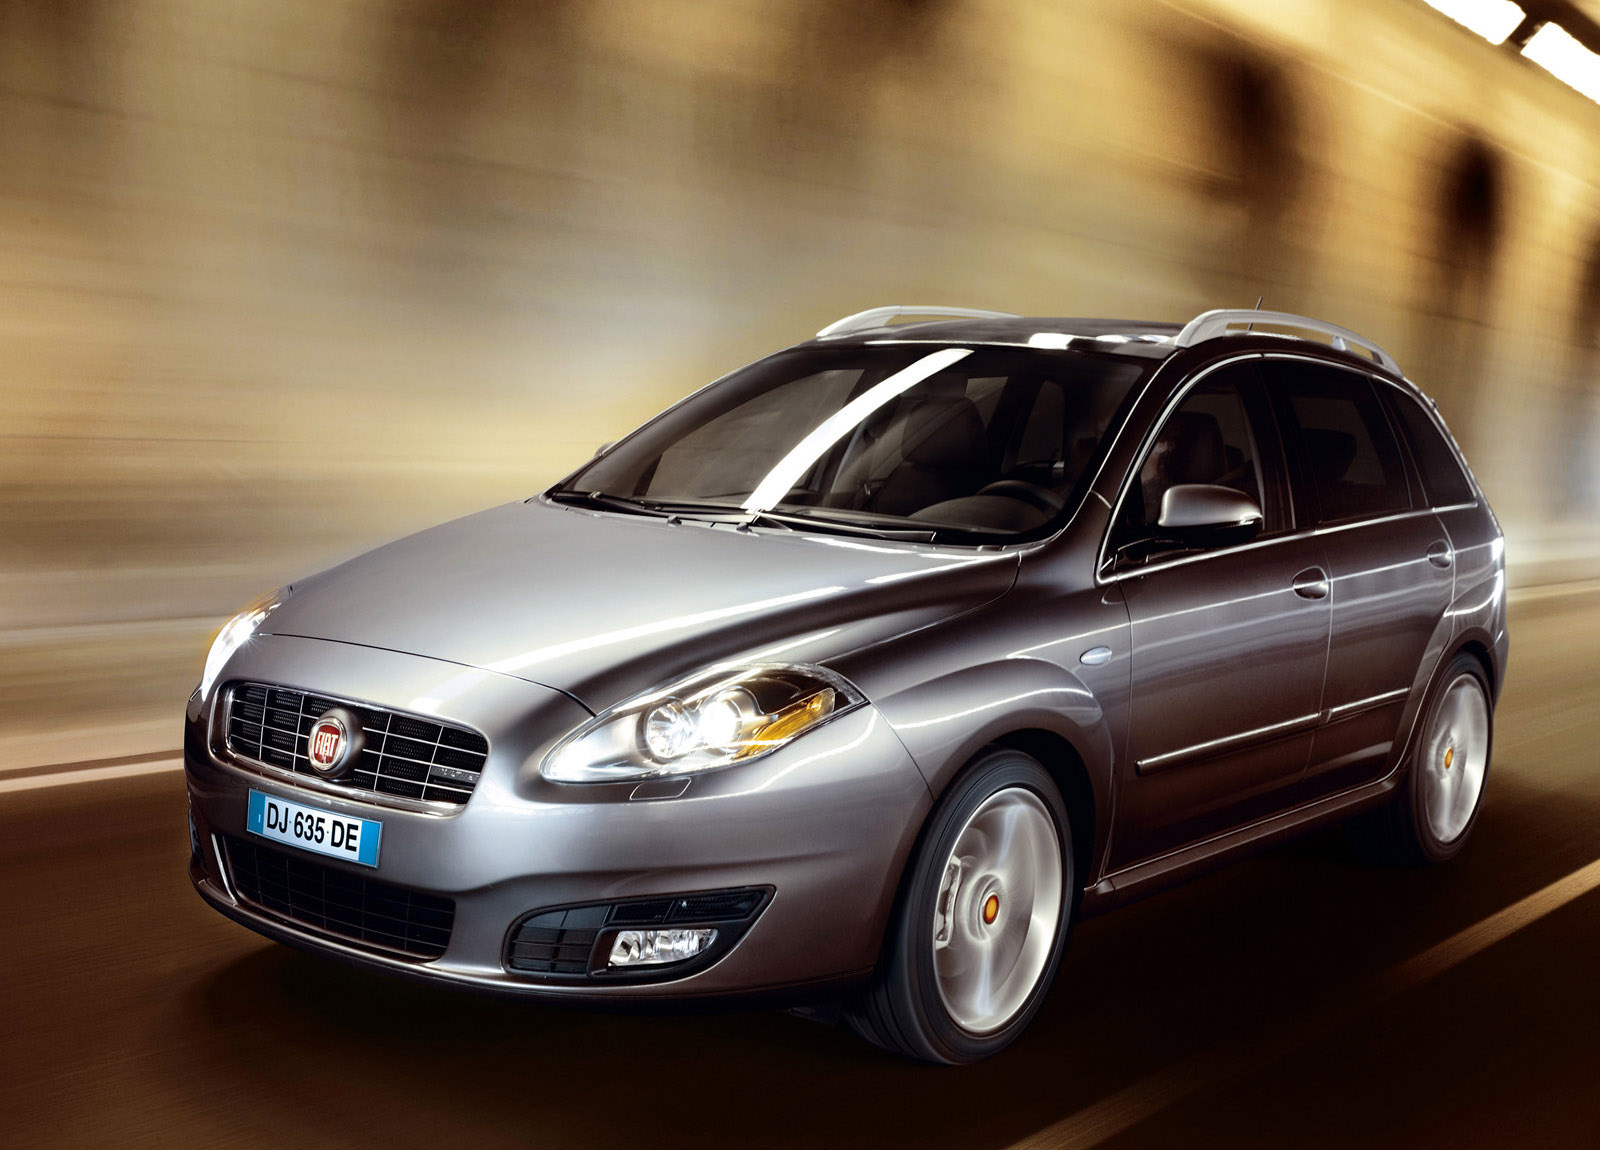 2008 Fiat Croma HD Pictures